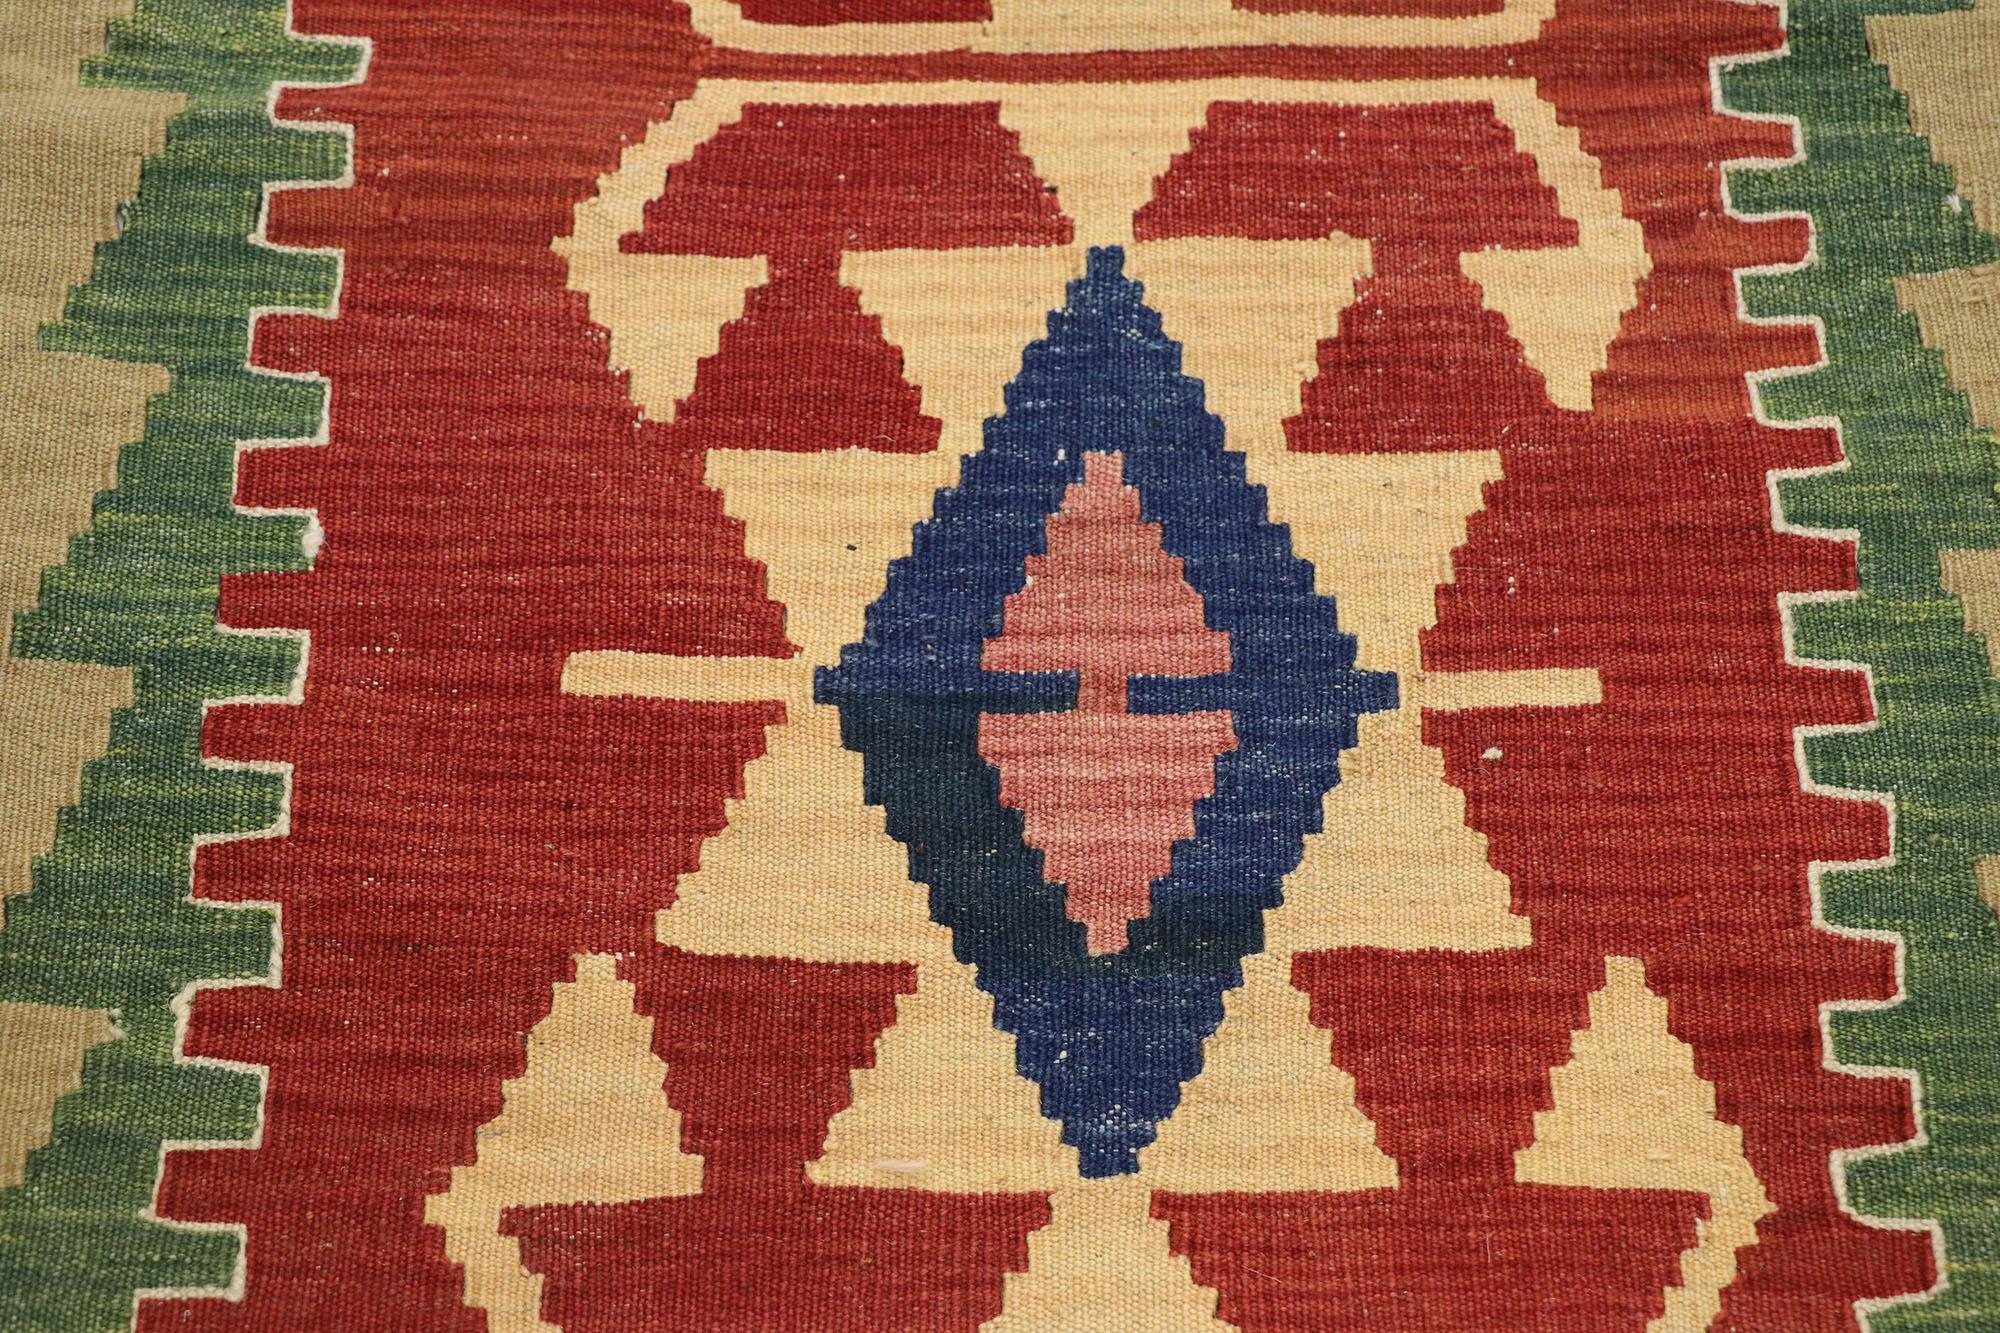 Vintage Persian Shiraz Kilim Rug, Luxury Lodge Meets Nomadic Charm In Good Condition For Sale In Dallas, TX